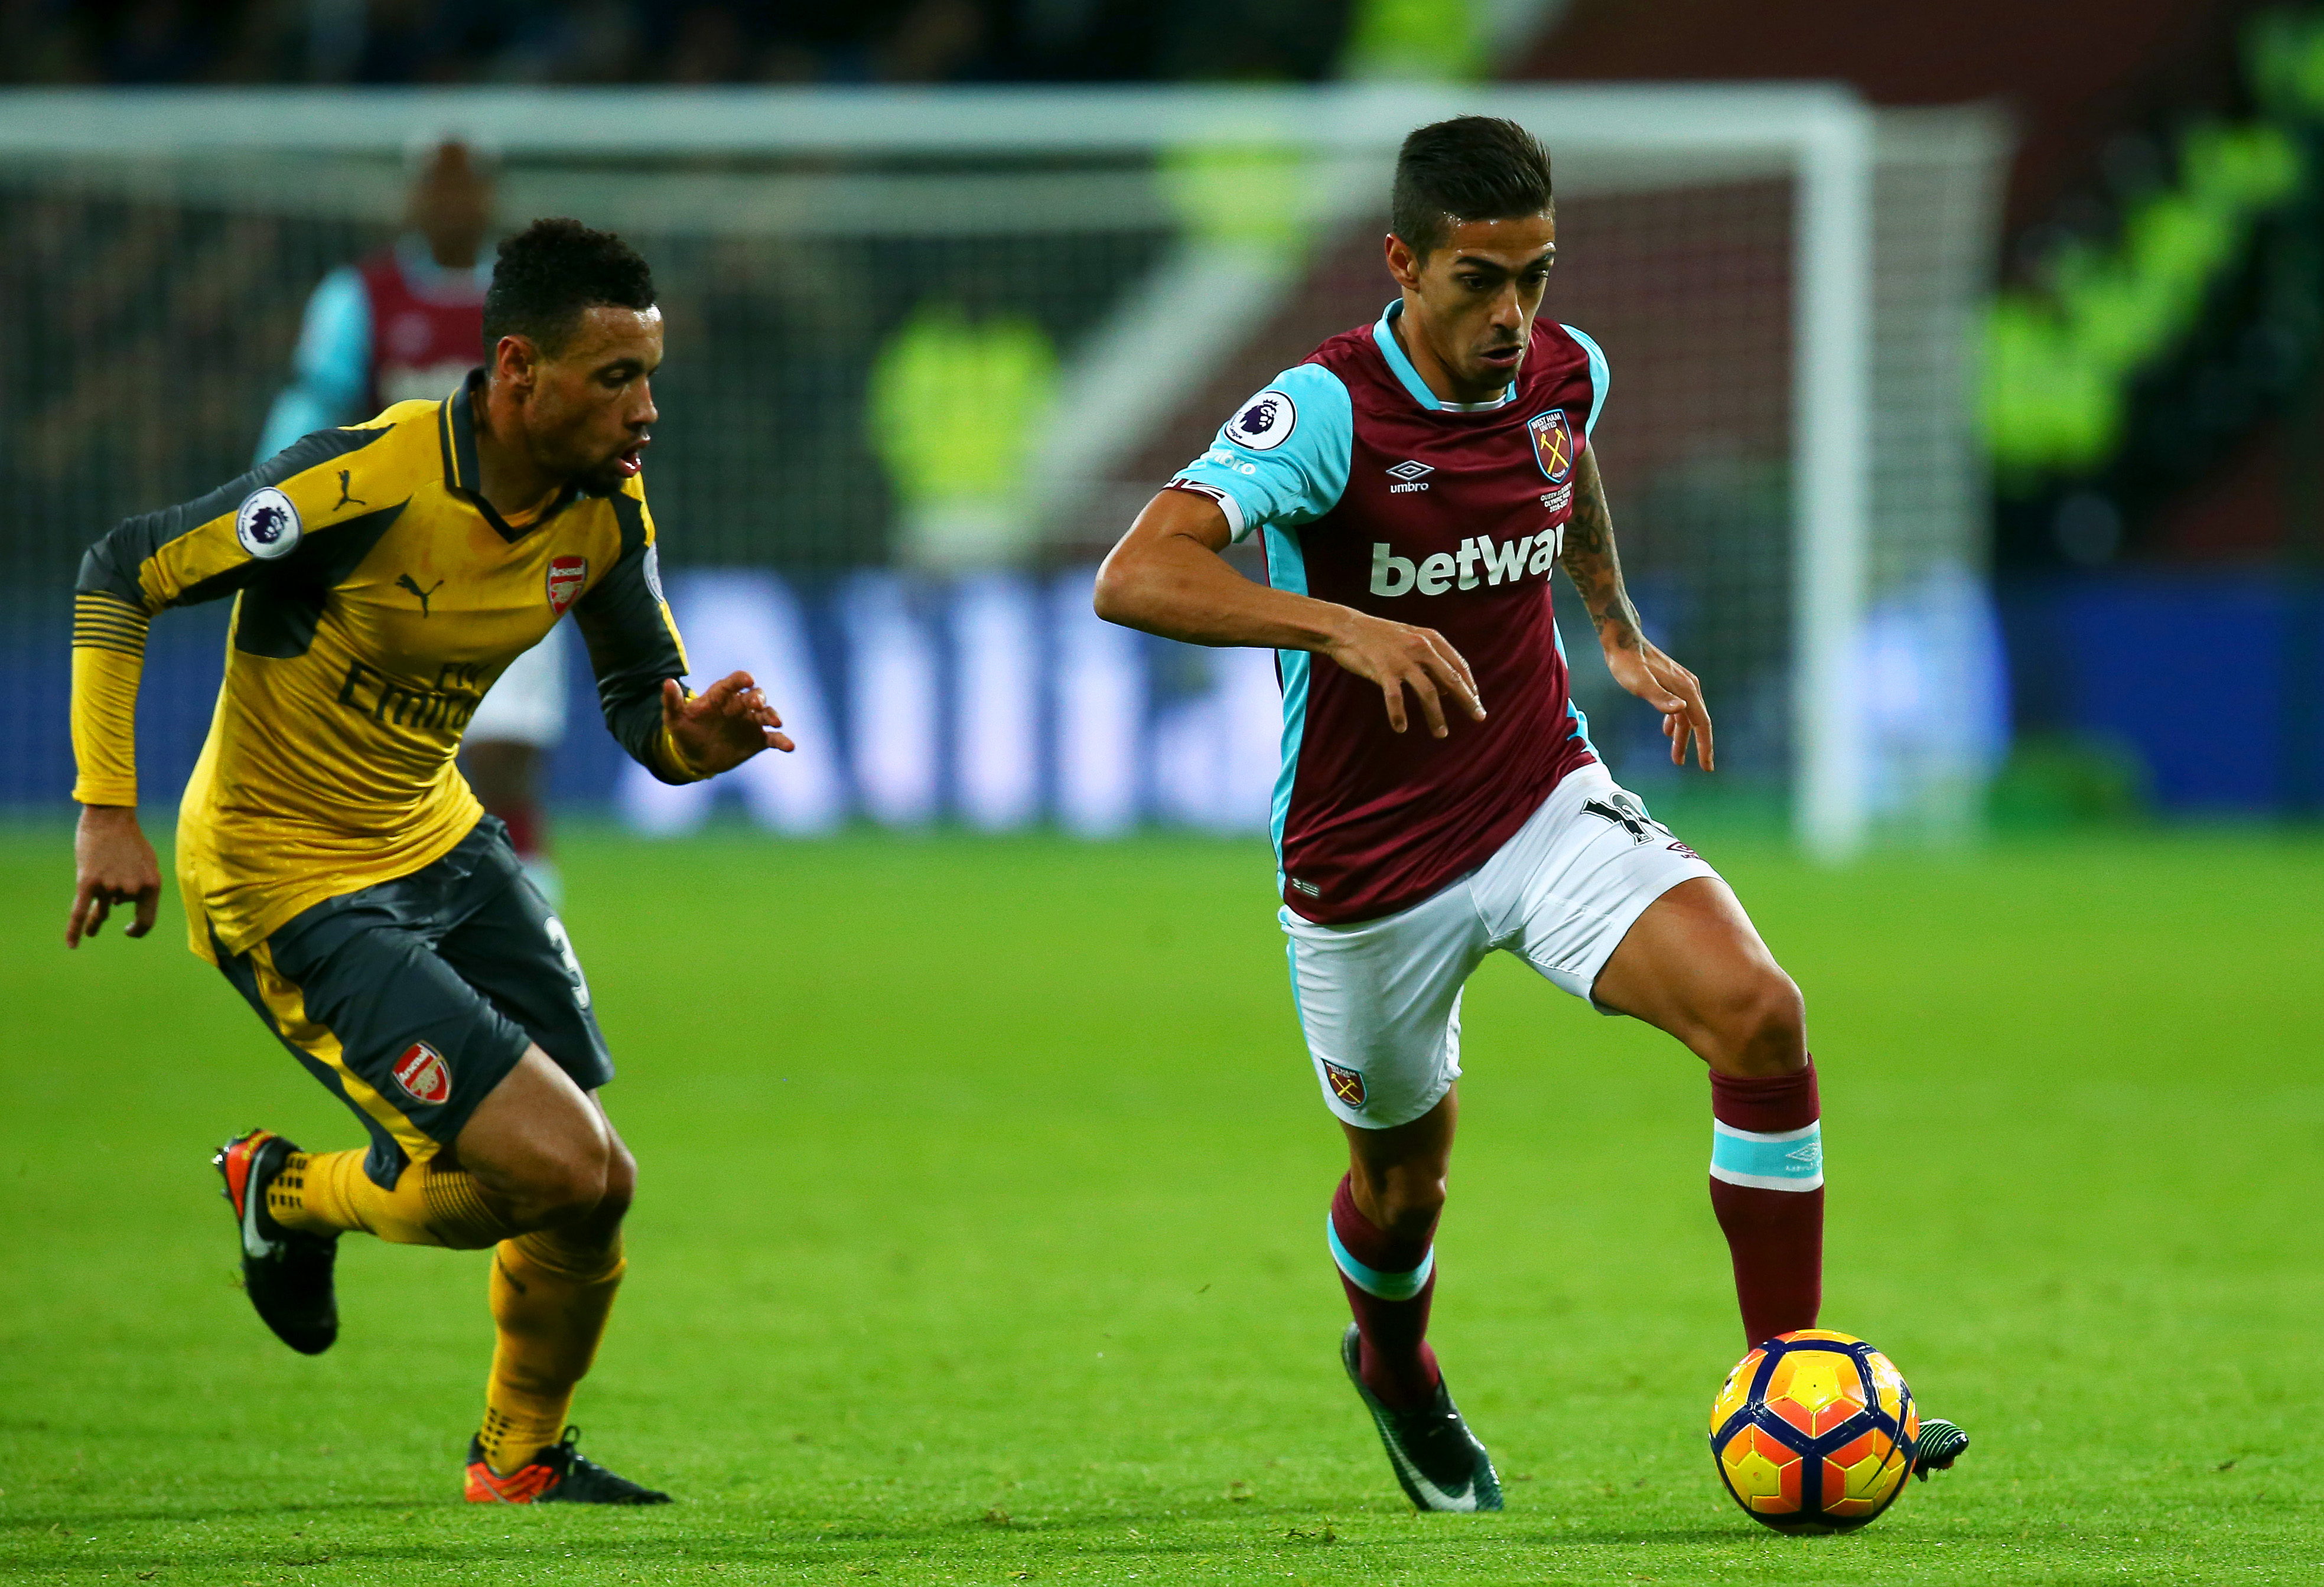 LONDON, ENGLAND - DECEMBER 03:  Manuel Lanzini of West Ham runs with the ball under pressure from Francis Coquelin of Arsenal during the Premier League match between West Ham United and Arsenal at London Stadium on December 3, 2016 in London, England.  (Photo by Charlie Crowhurst/Getty Images)